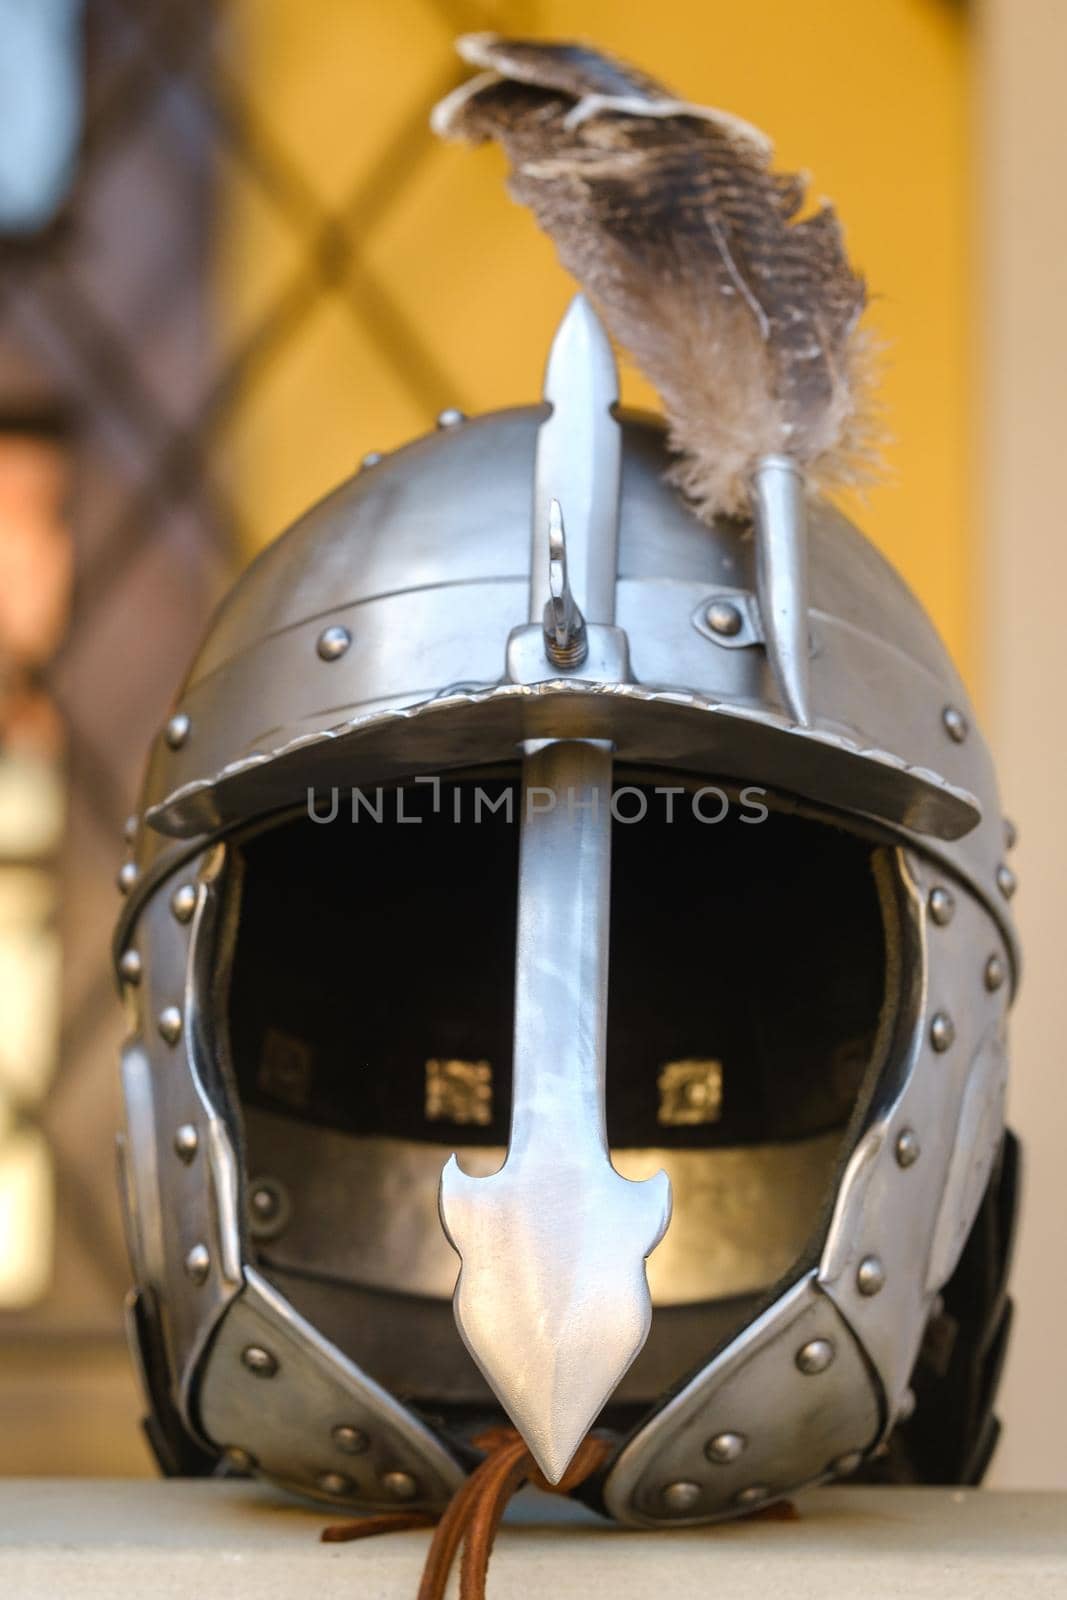 An ancient knight's helmet with a feather .Medieval concept by Lobachad